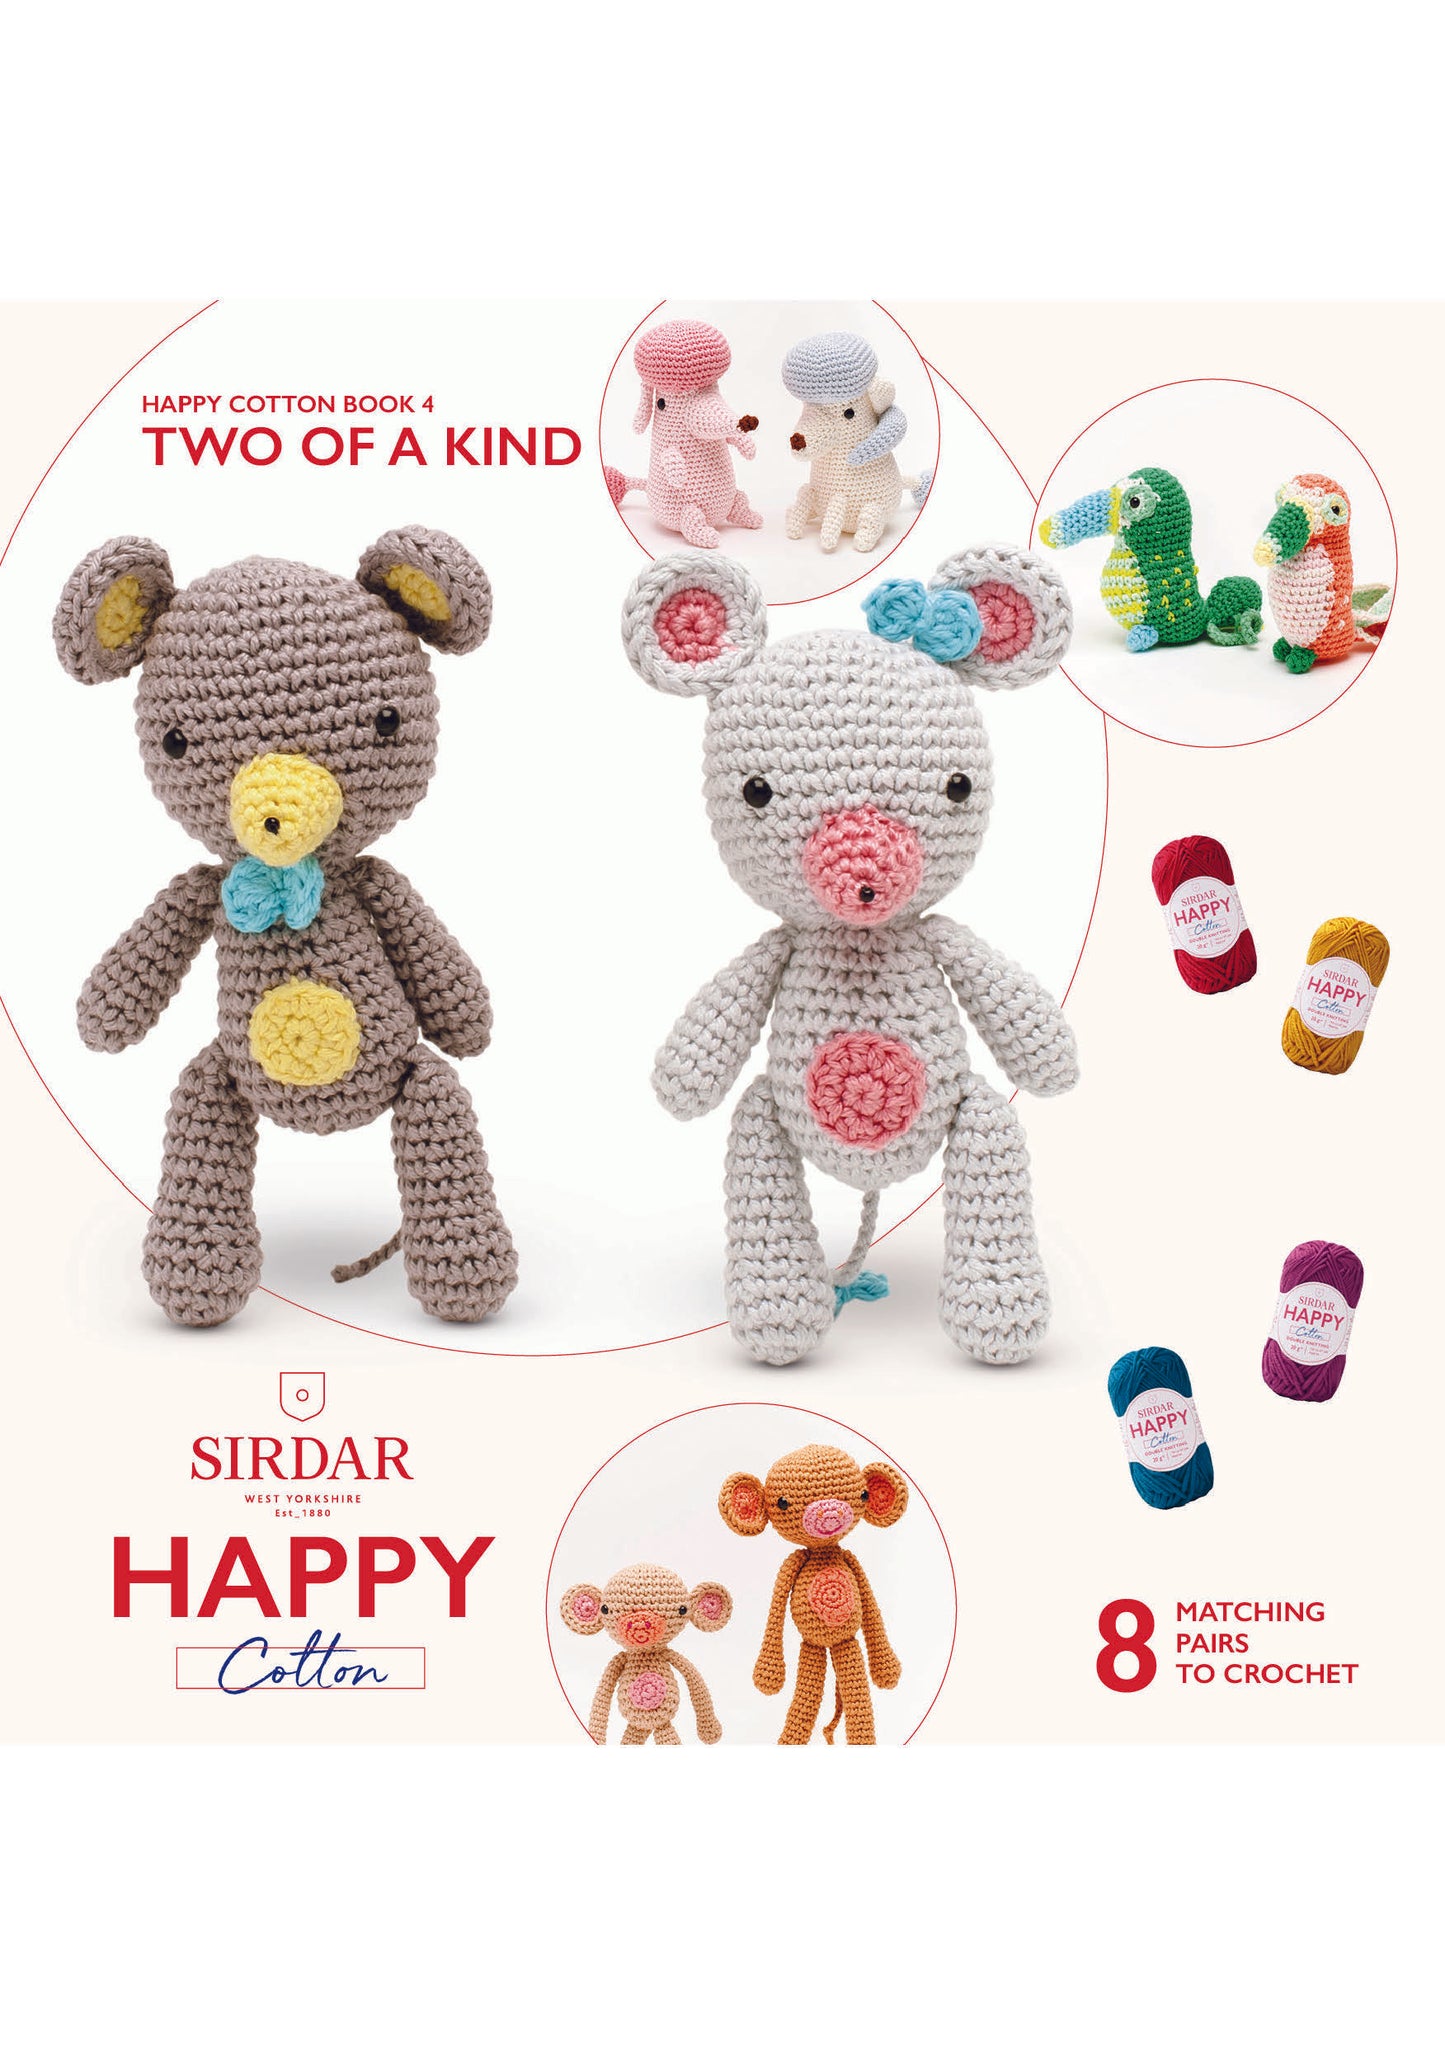 Sirdar Happy Cotton Book 4 - Two of a Kind